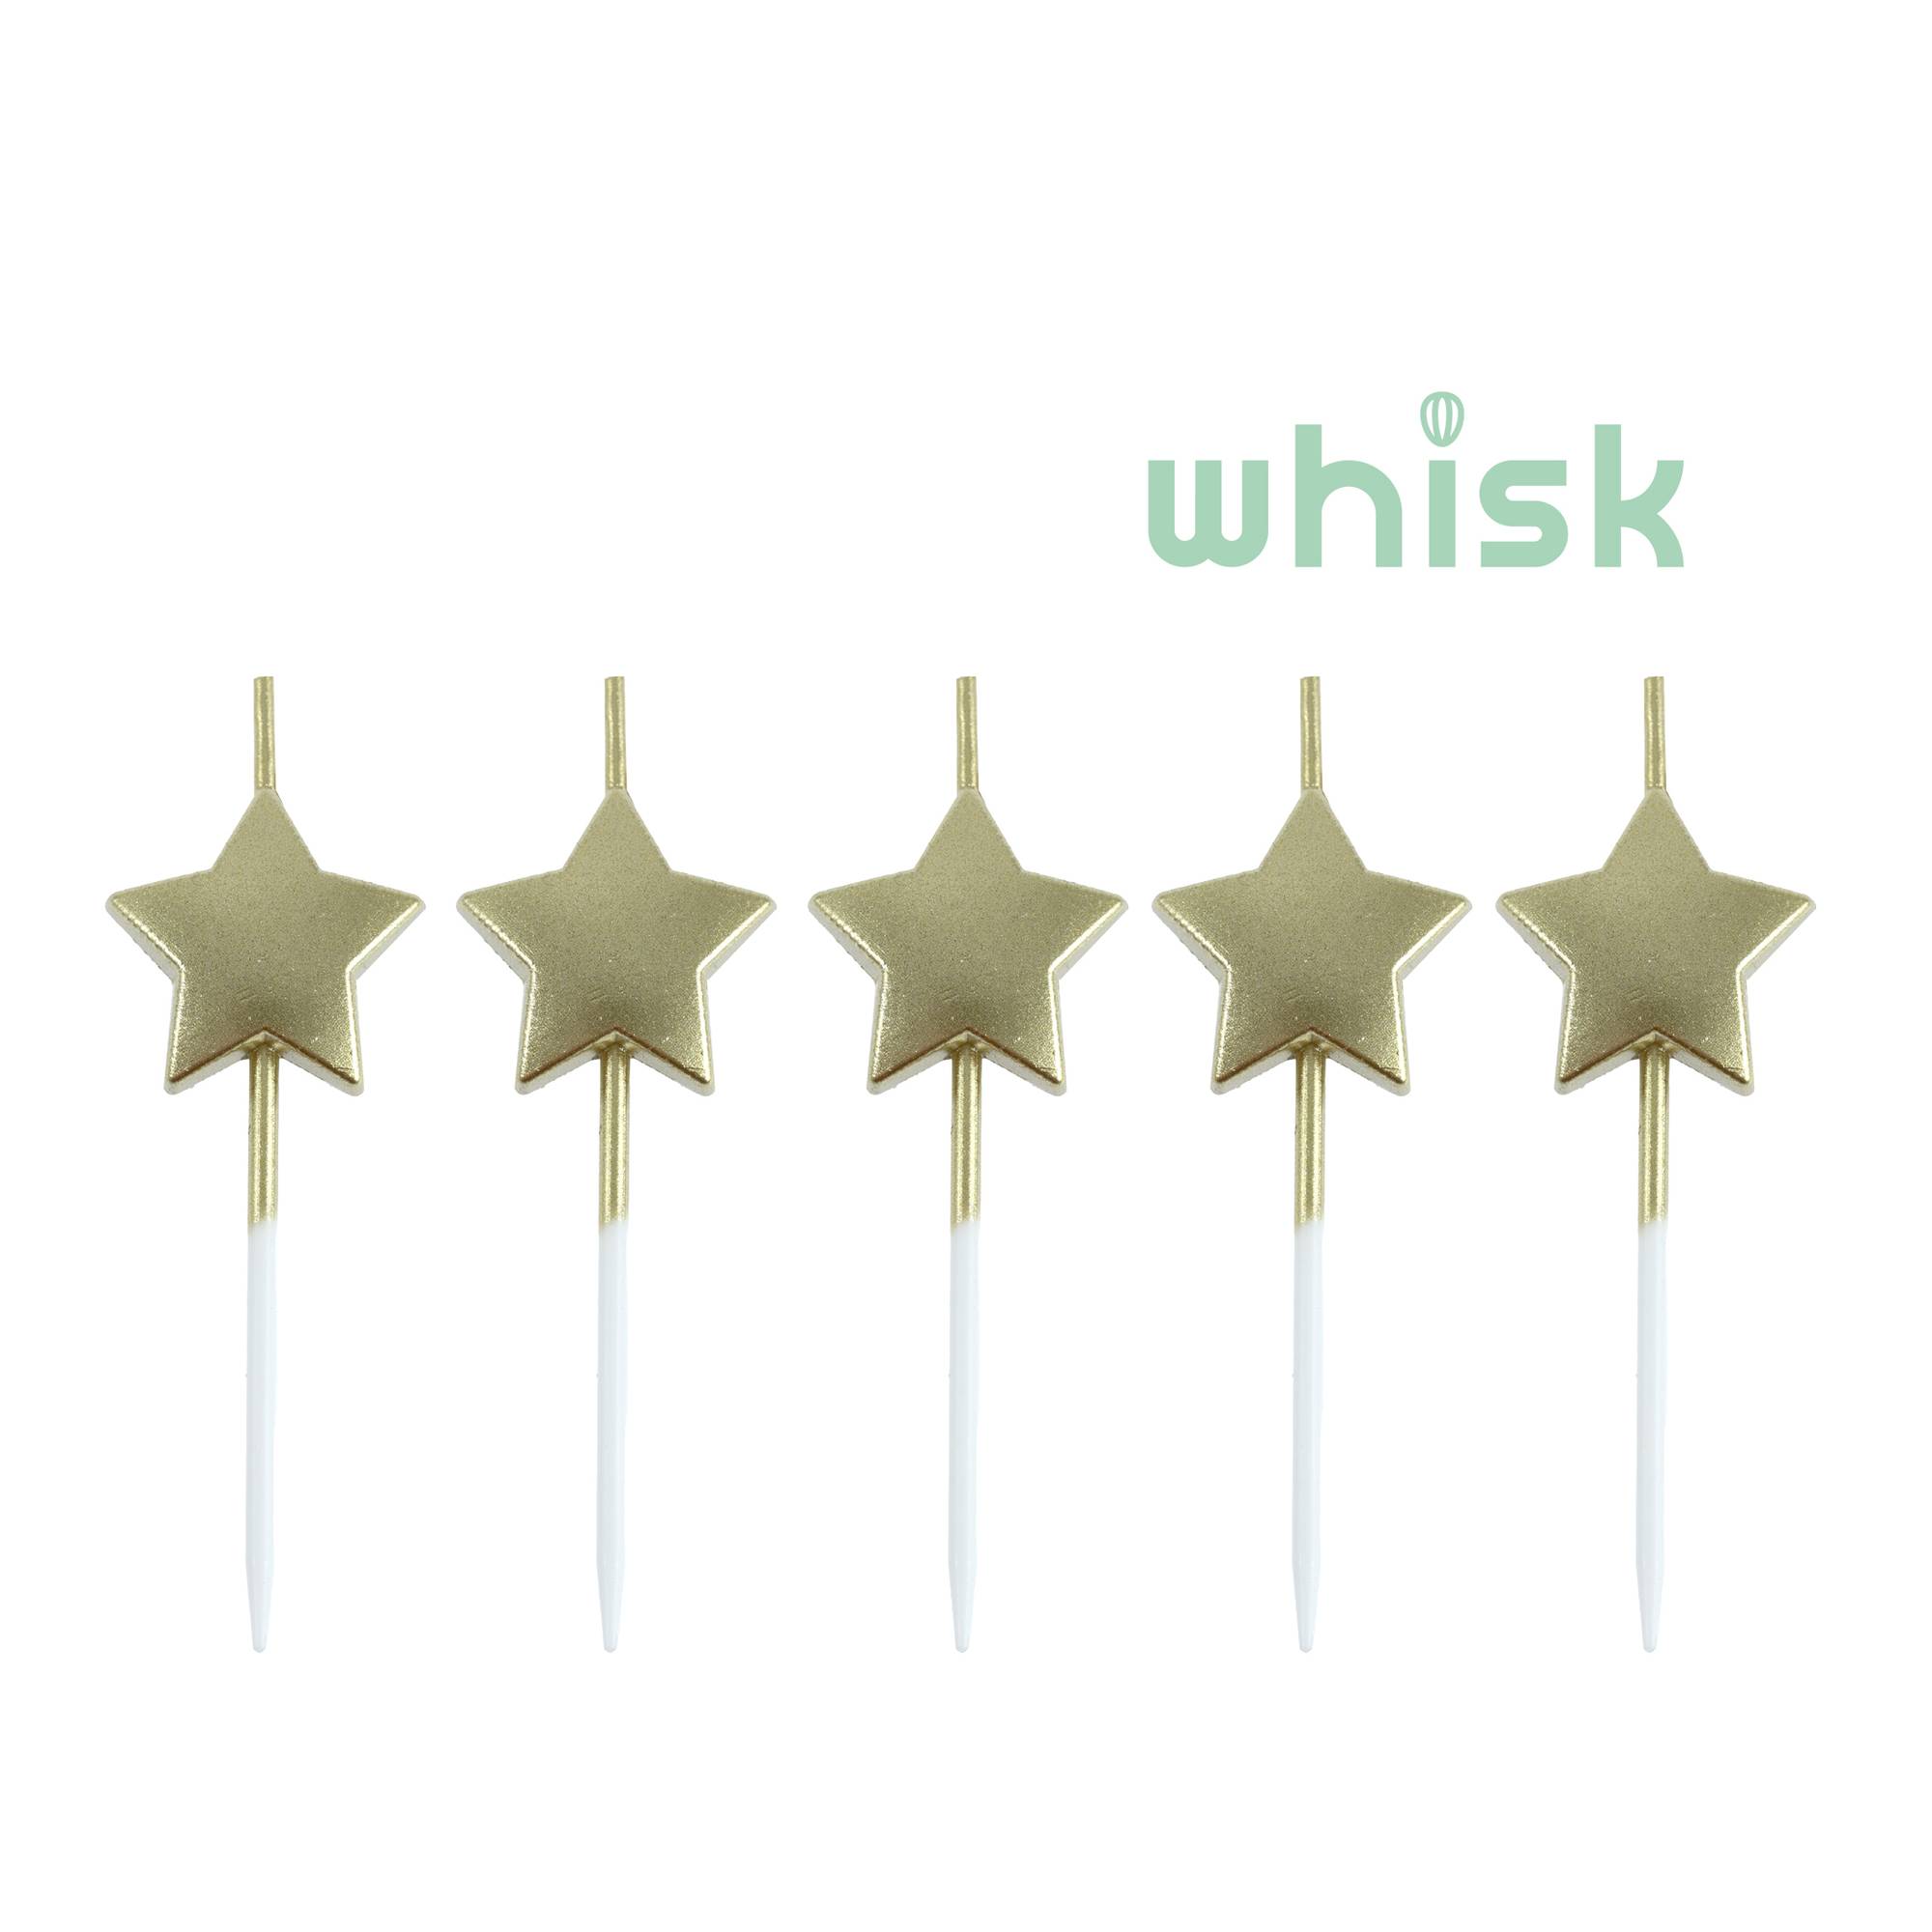 Whisk Gold Star Candles 5 Pack